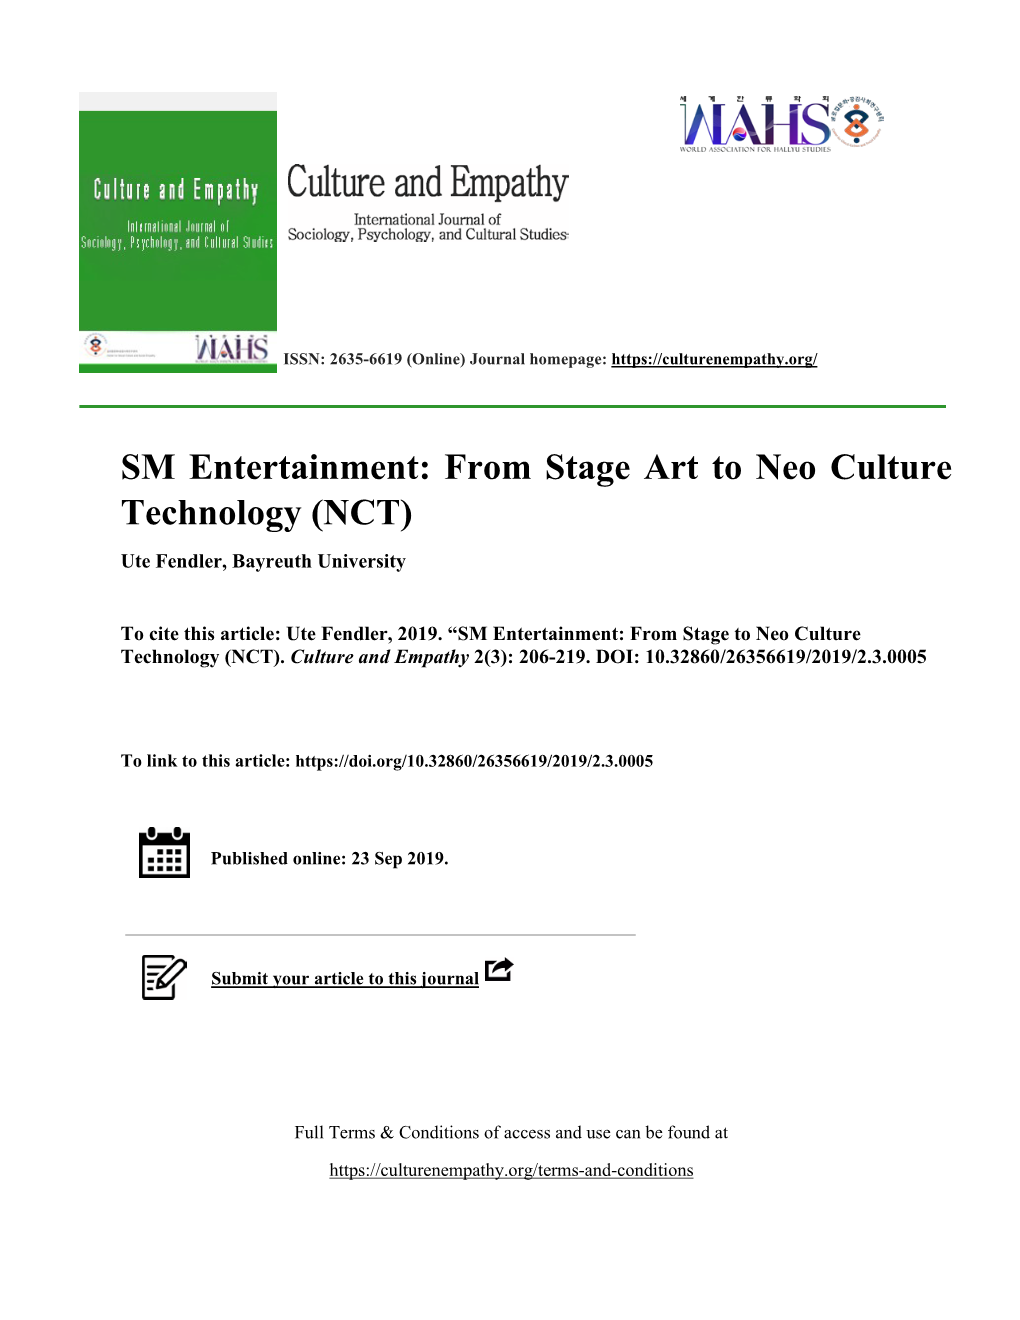 SM Entertainment: from Stage Art to Neo Culture Technology (NCT) Ute Fendler, Bayreuth University